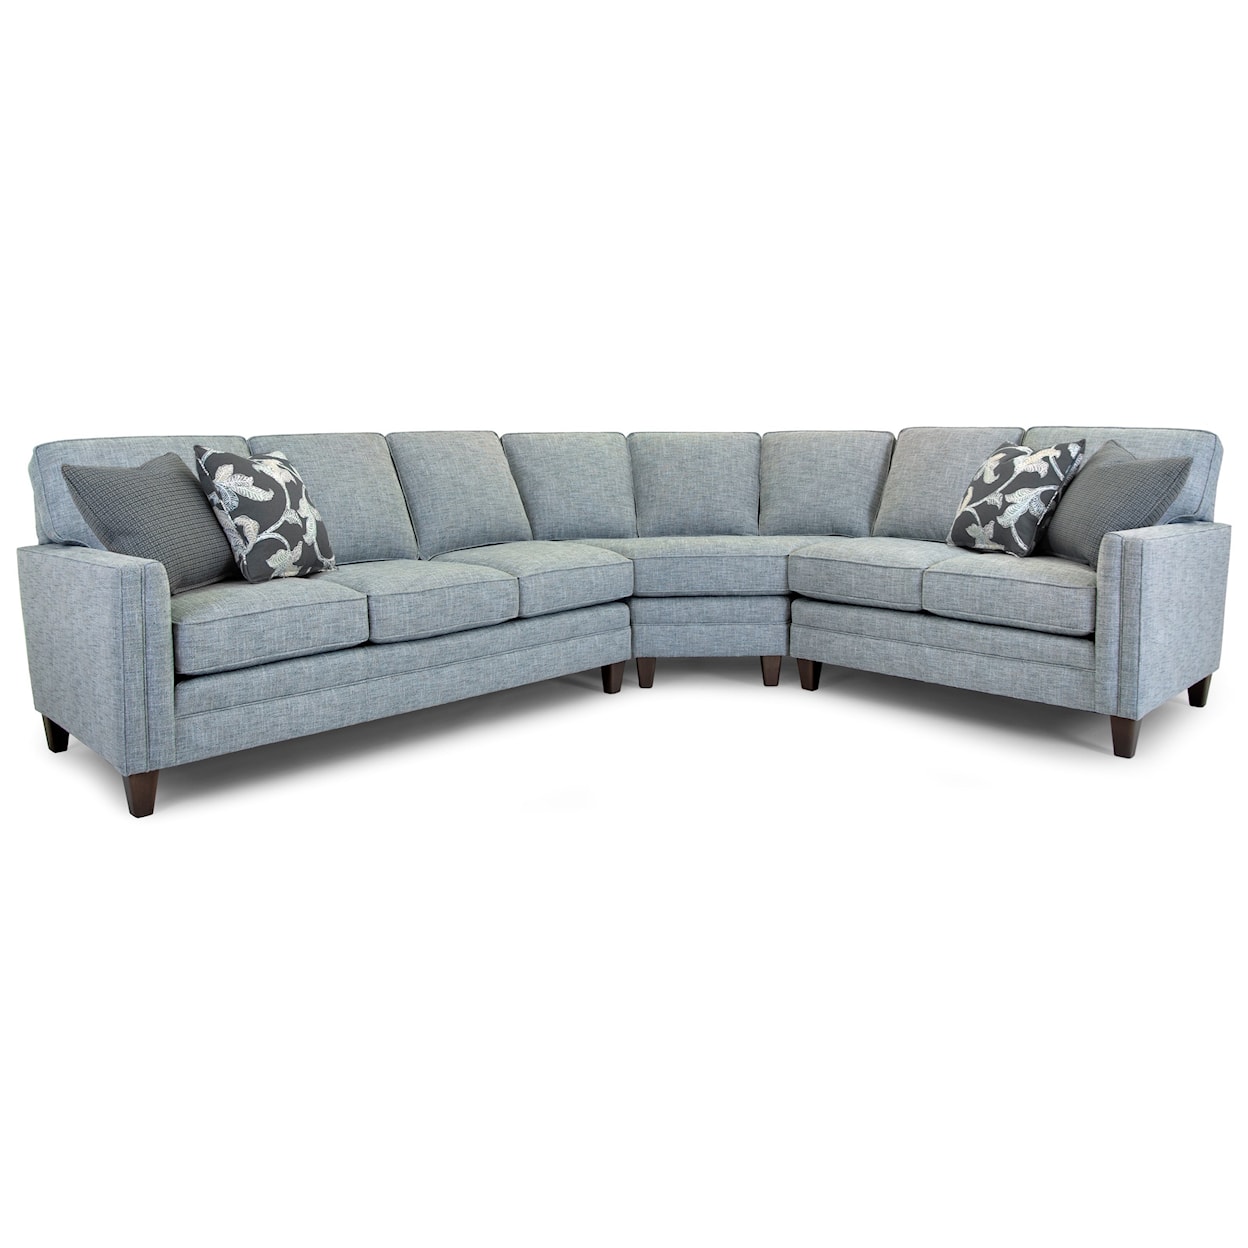 Smith Brothers Build Your Own 3000 Series Customizable 3-Piece Sectional